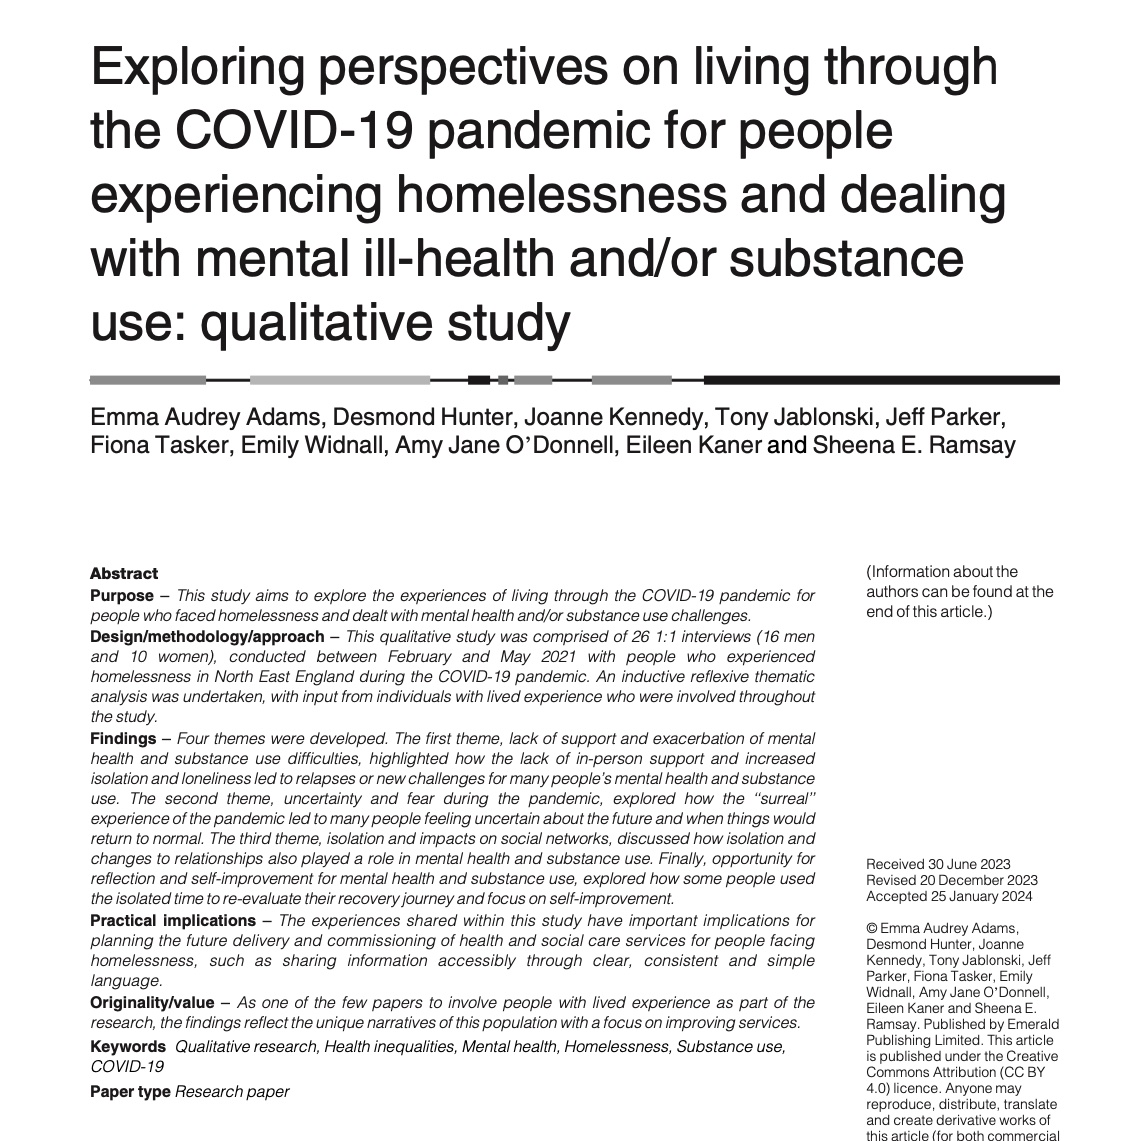 📢New Paper! Final paper from our @NIHRSPHR ResNet project exploring experiences of living through the pandemic for people experiencing #homelessness & #mentalhealth #substanceuse in North East England is now available in Advances in Dual Diagnosis!! doi.org/10.1108/ADD-06…